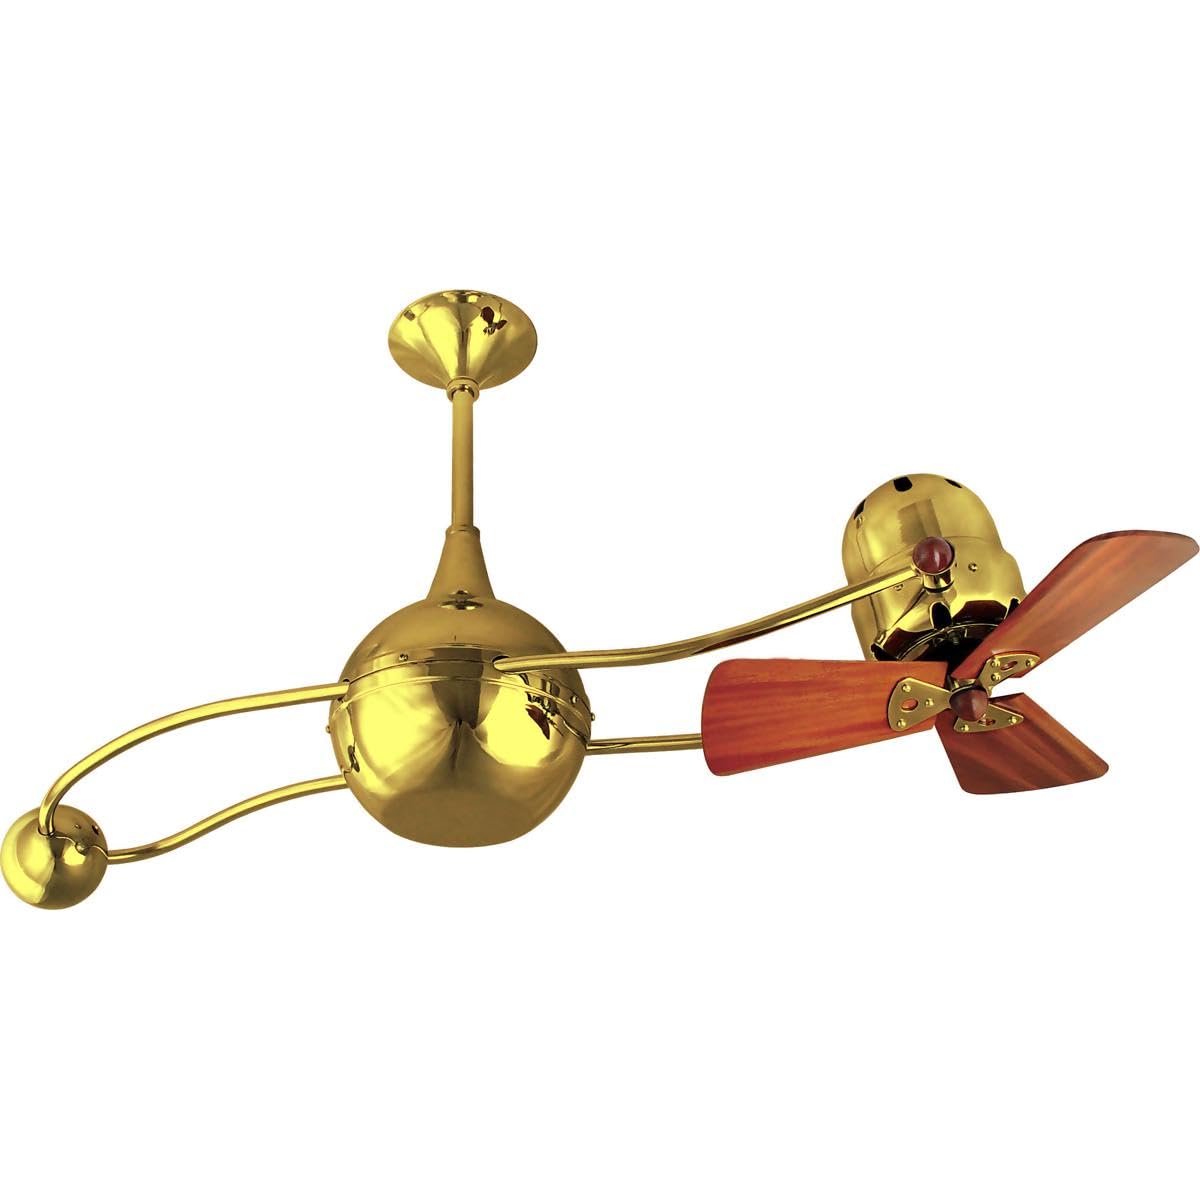 Matthews Fan B2K-GOLD-WD Brisa 360° counterweight rotational ceiling fan in Ouro (Gold) finish with solid sustainable mahogany wood blades.